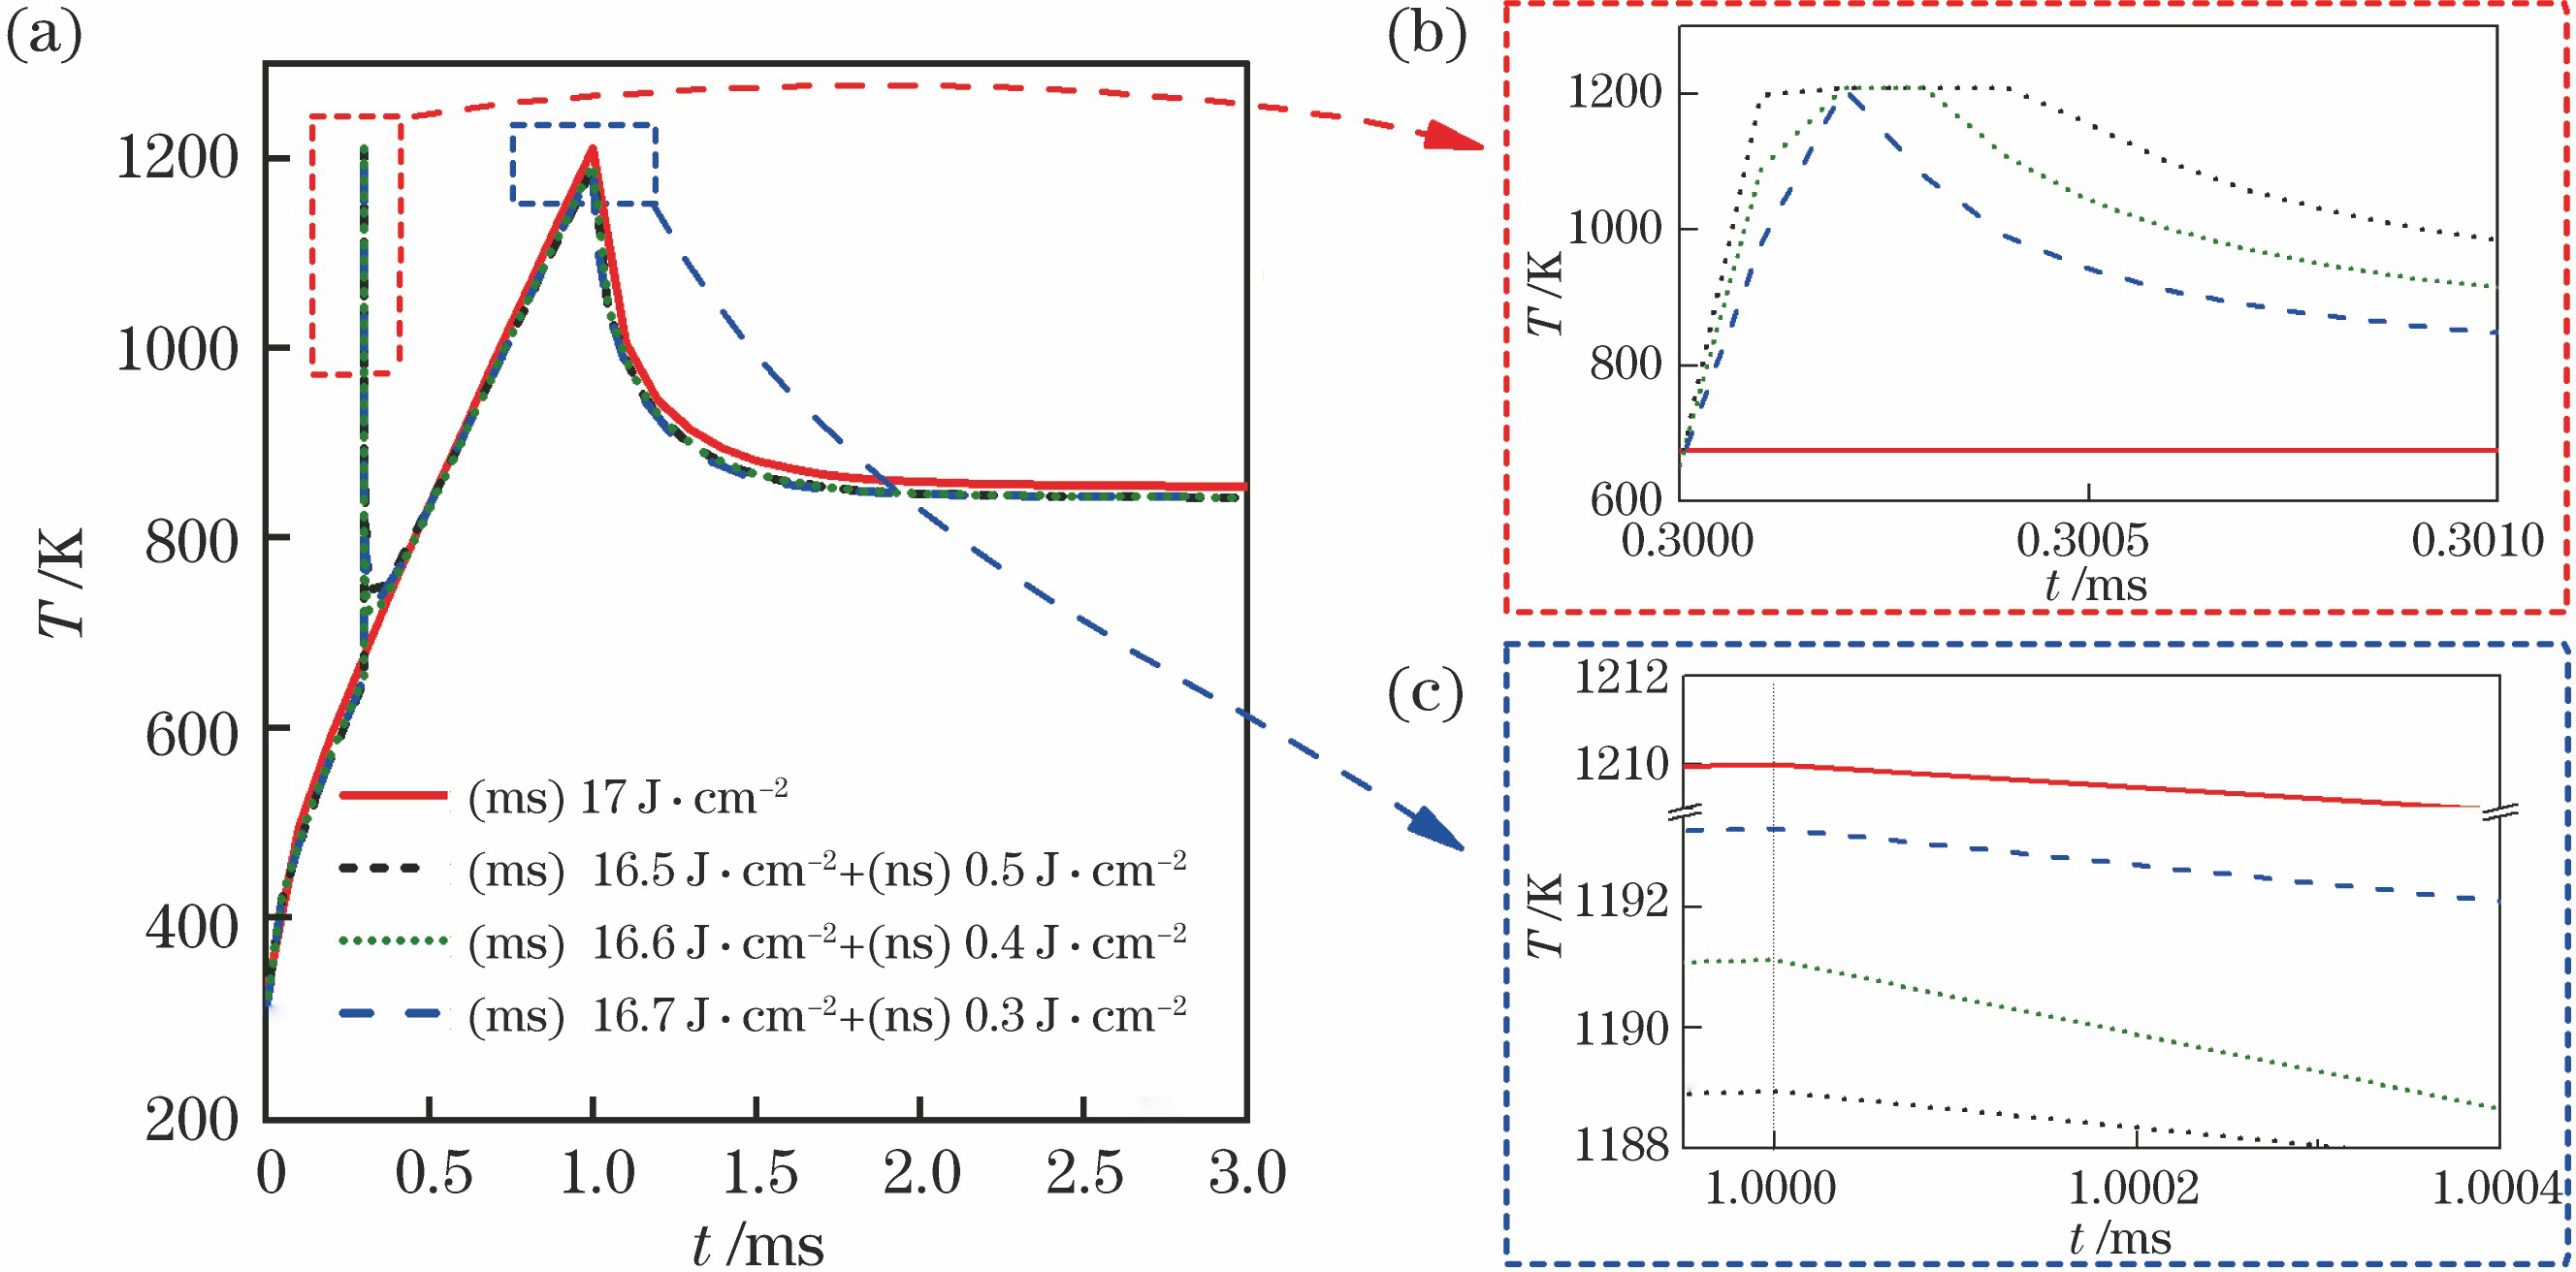 Maximum temperature of solar cell as a function of time when action time delay of nanosecond laser is 0.3 ms. (a) Whole curves; (b)(c) partial enlarged details